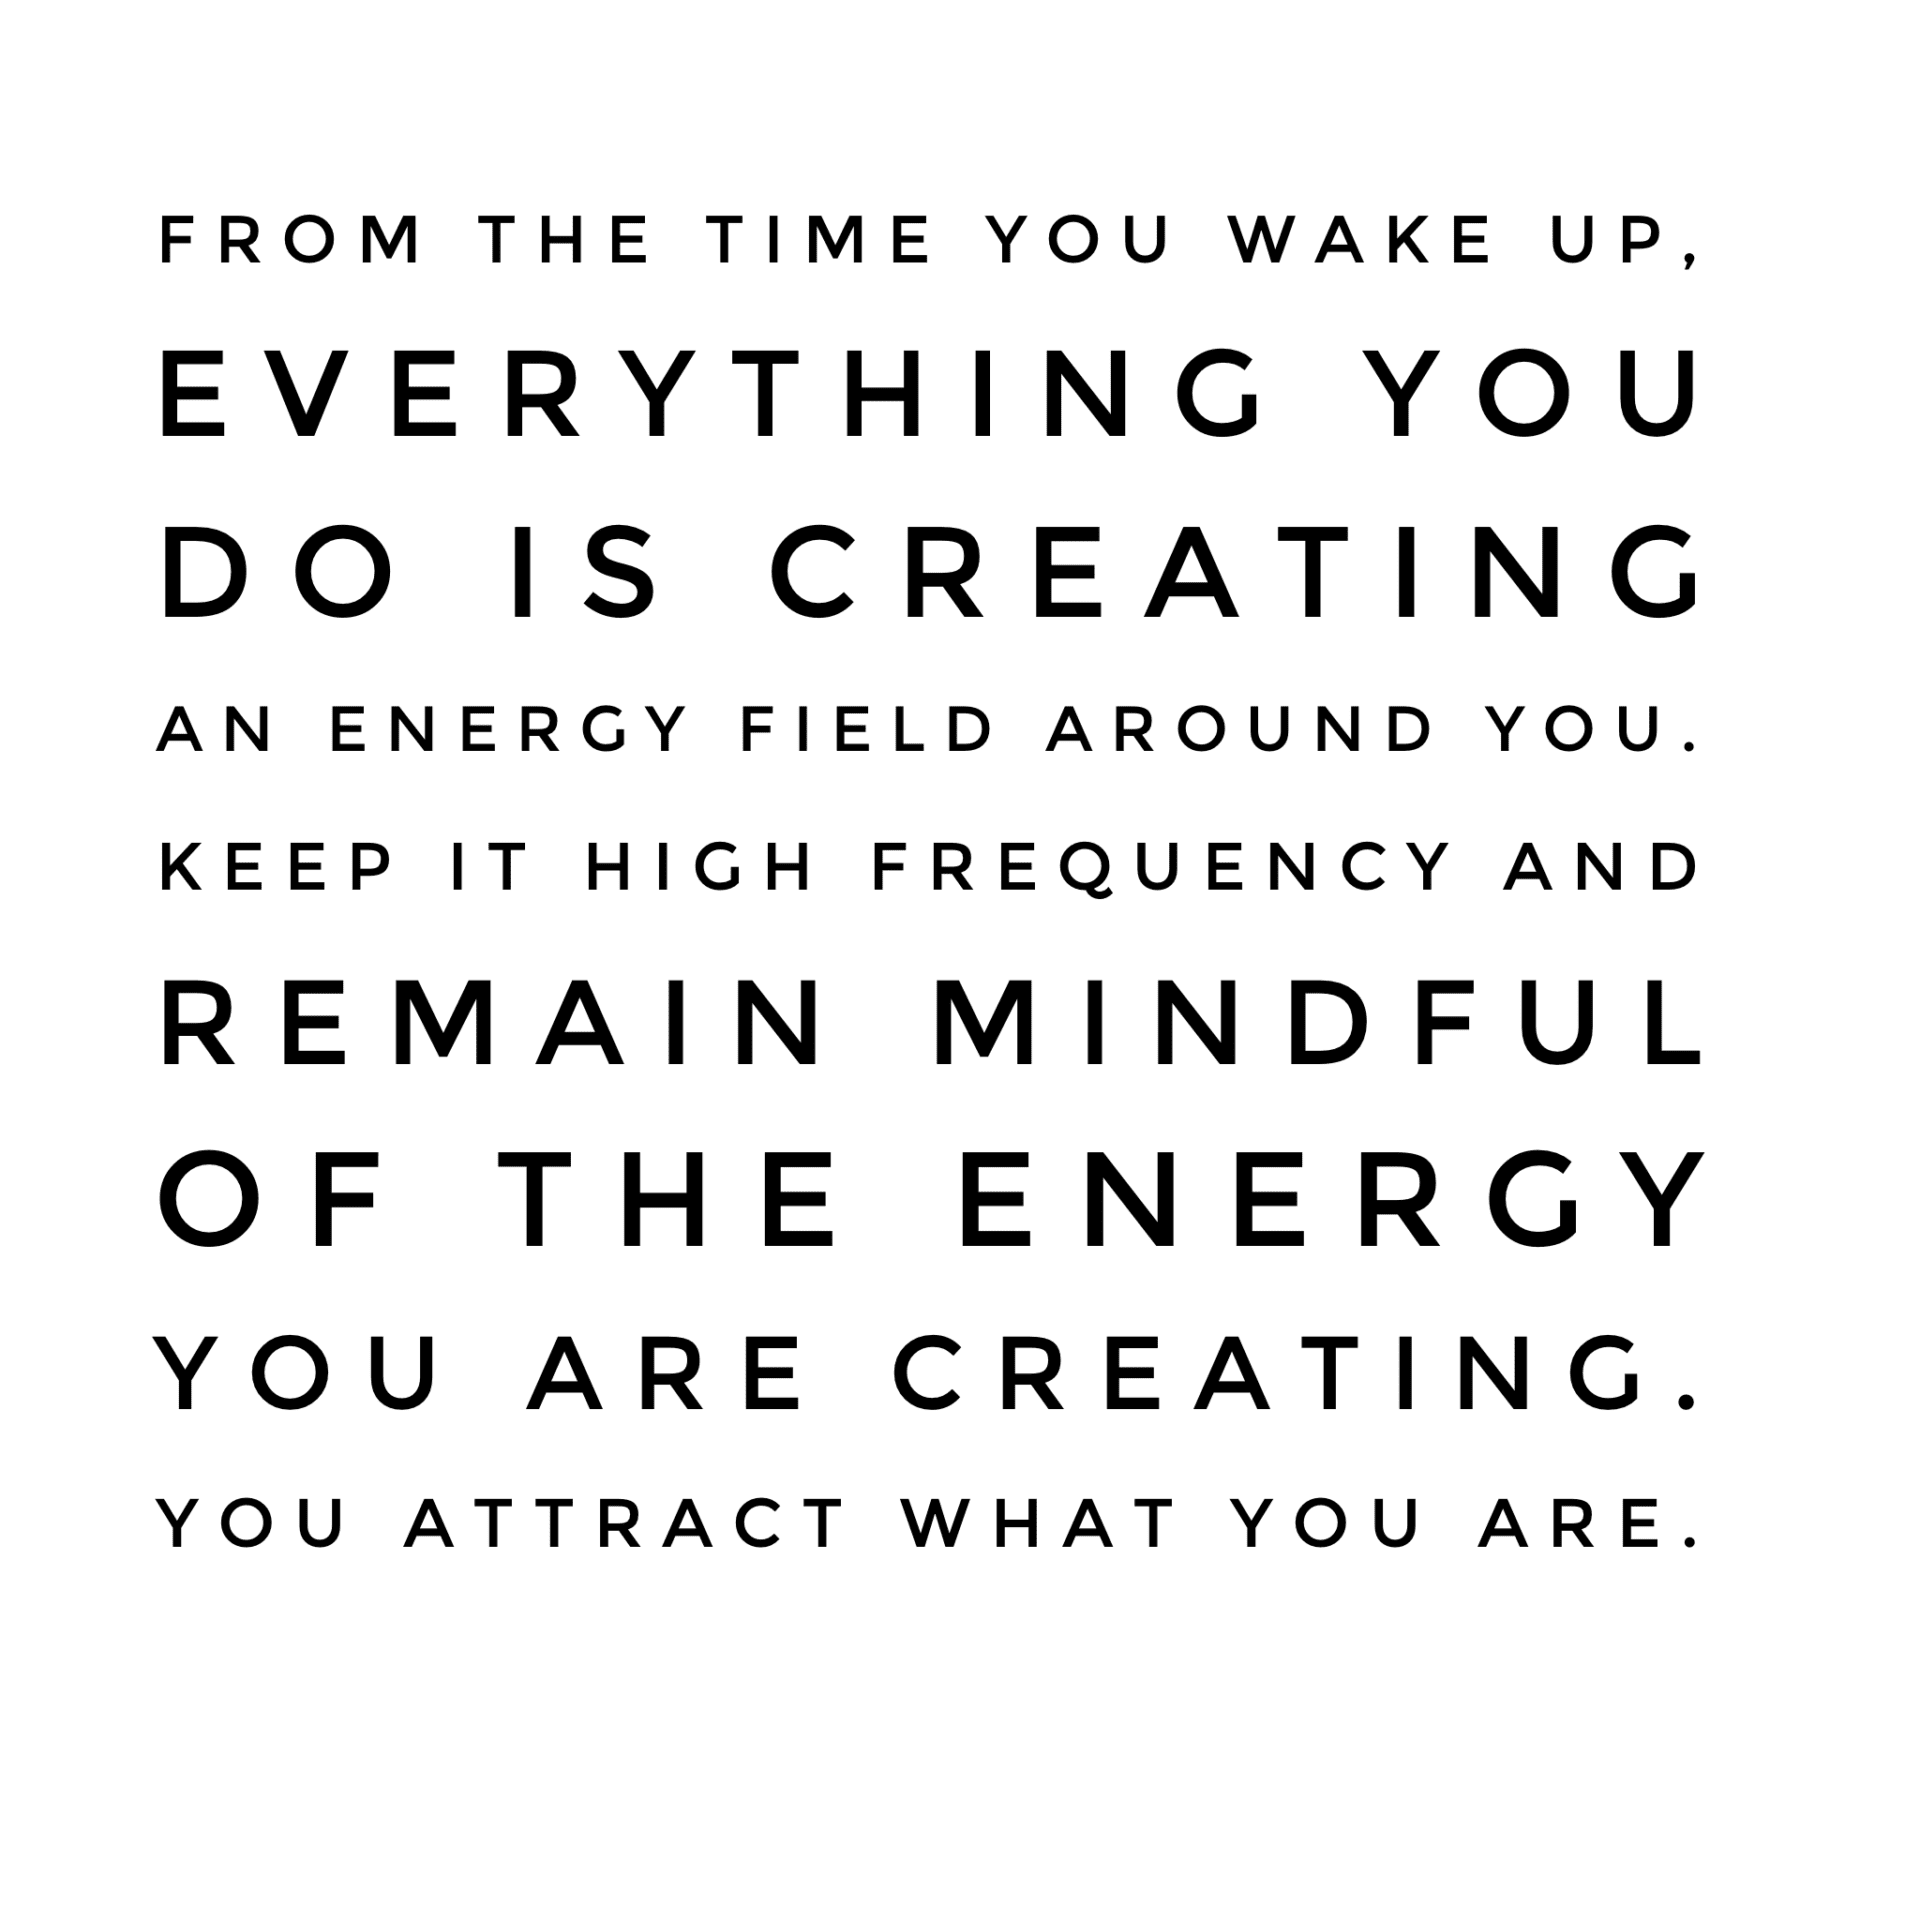 Energy is Contagious